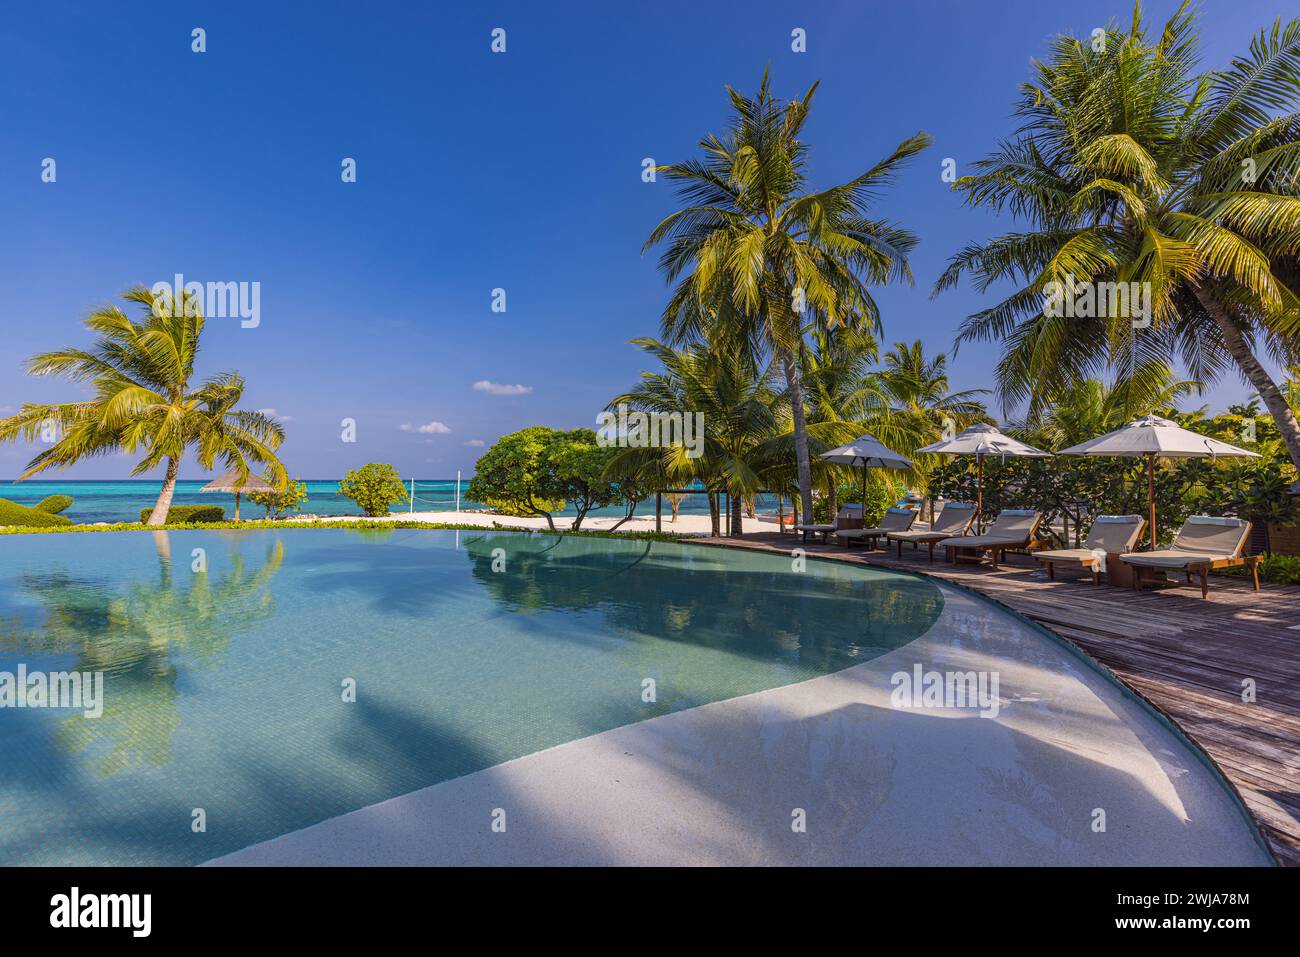 Outdoor summer tourism landscape. Luxury beach resort with swimming pool and beach chairs or loungers under umbrellas with palm trees and blue sky Stock Photo